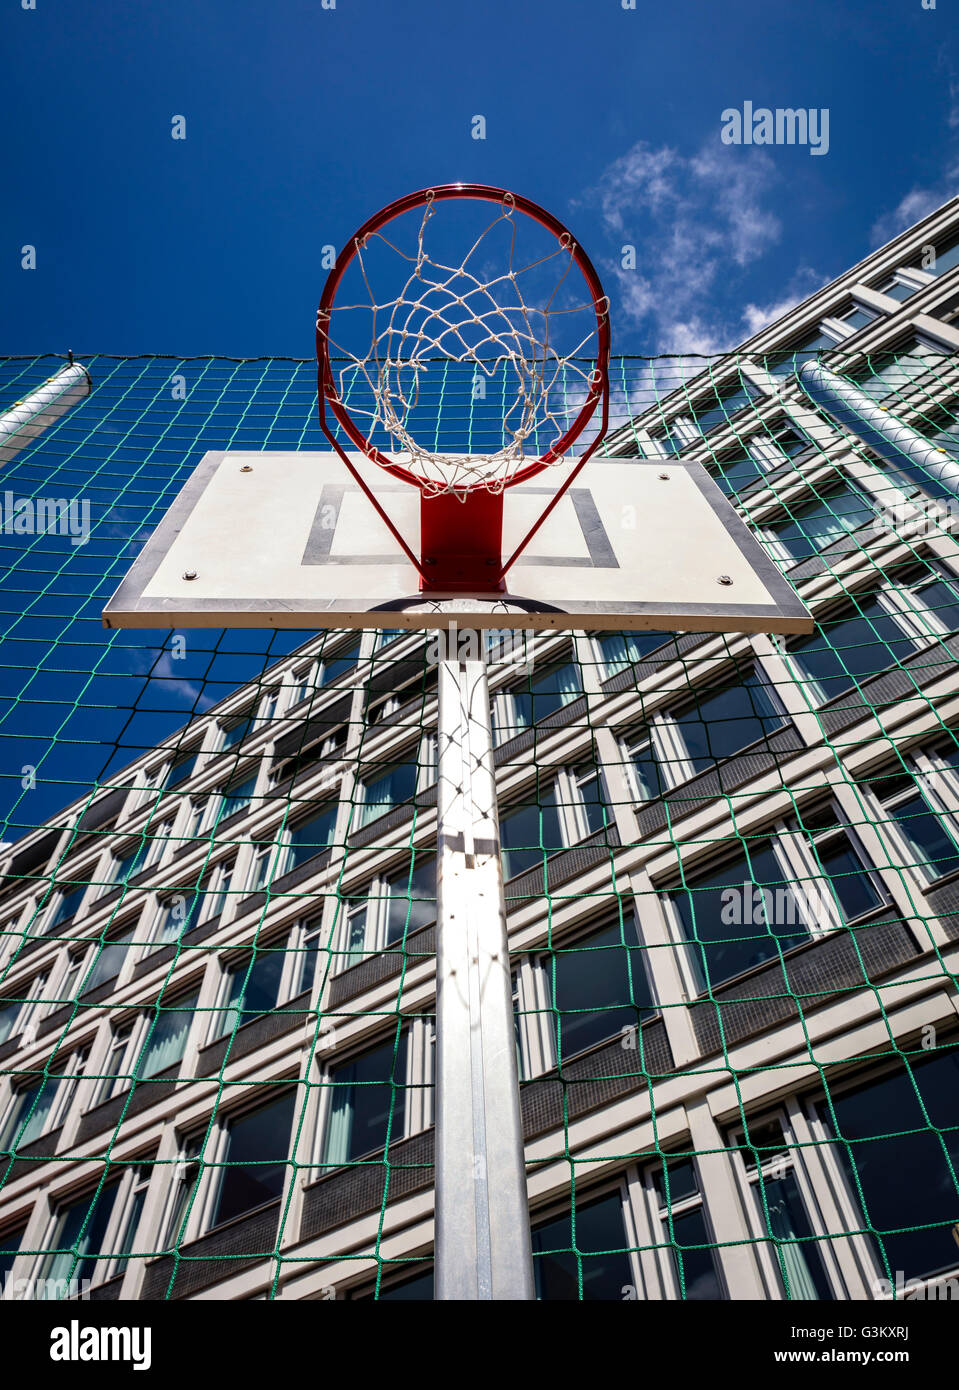 Basketball basket in front of house, Berlin, Germany Stock Photo